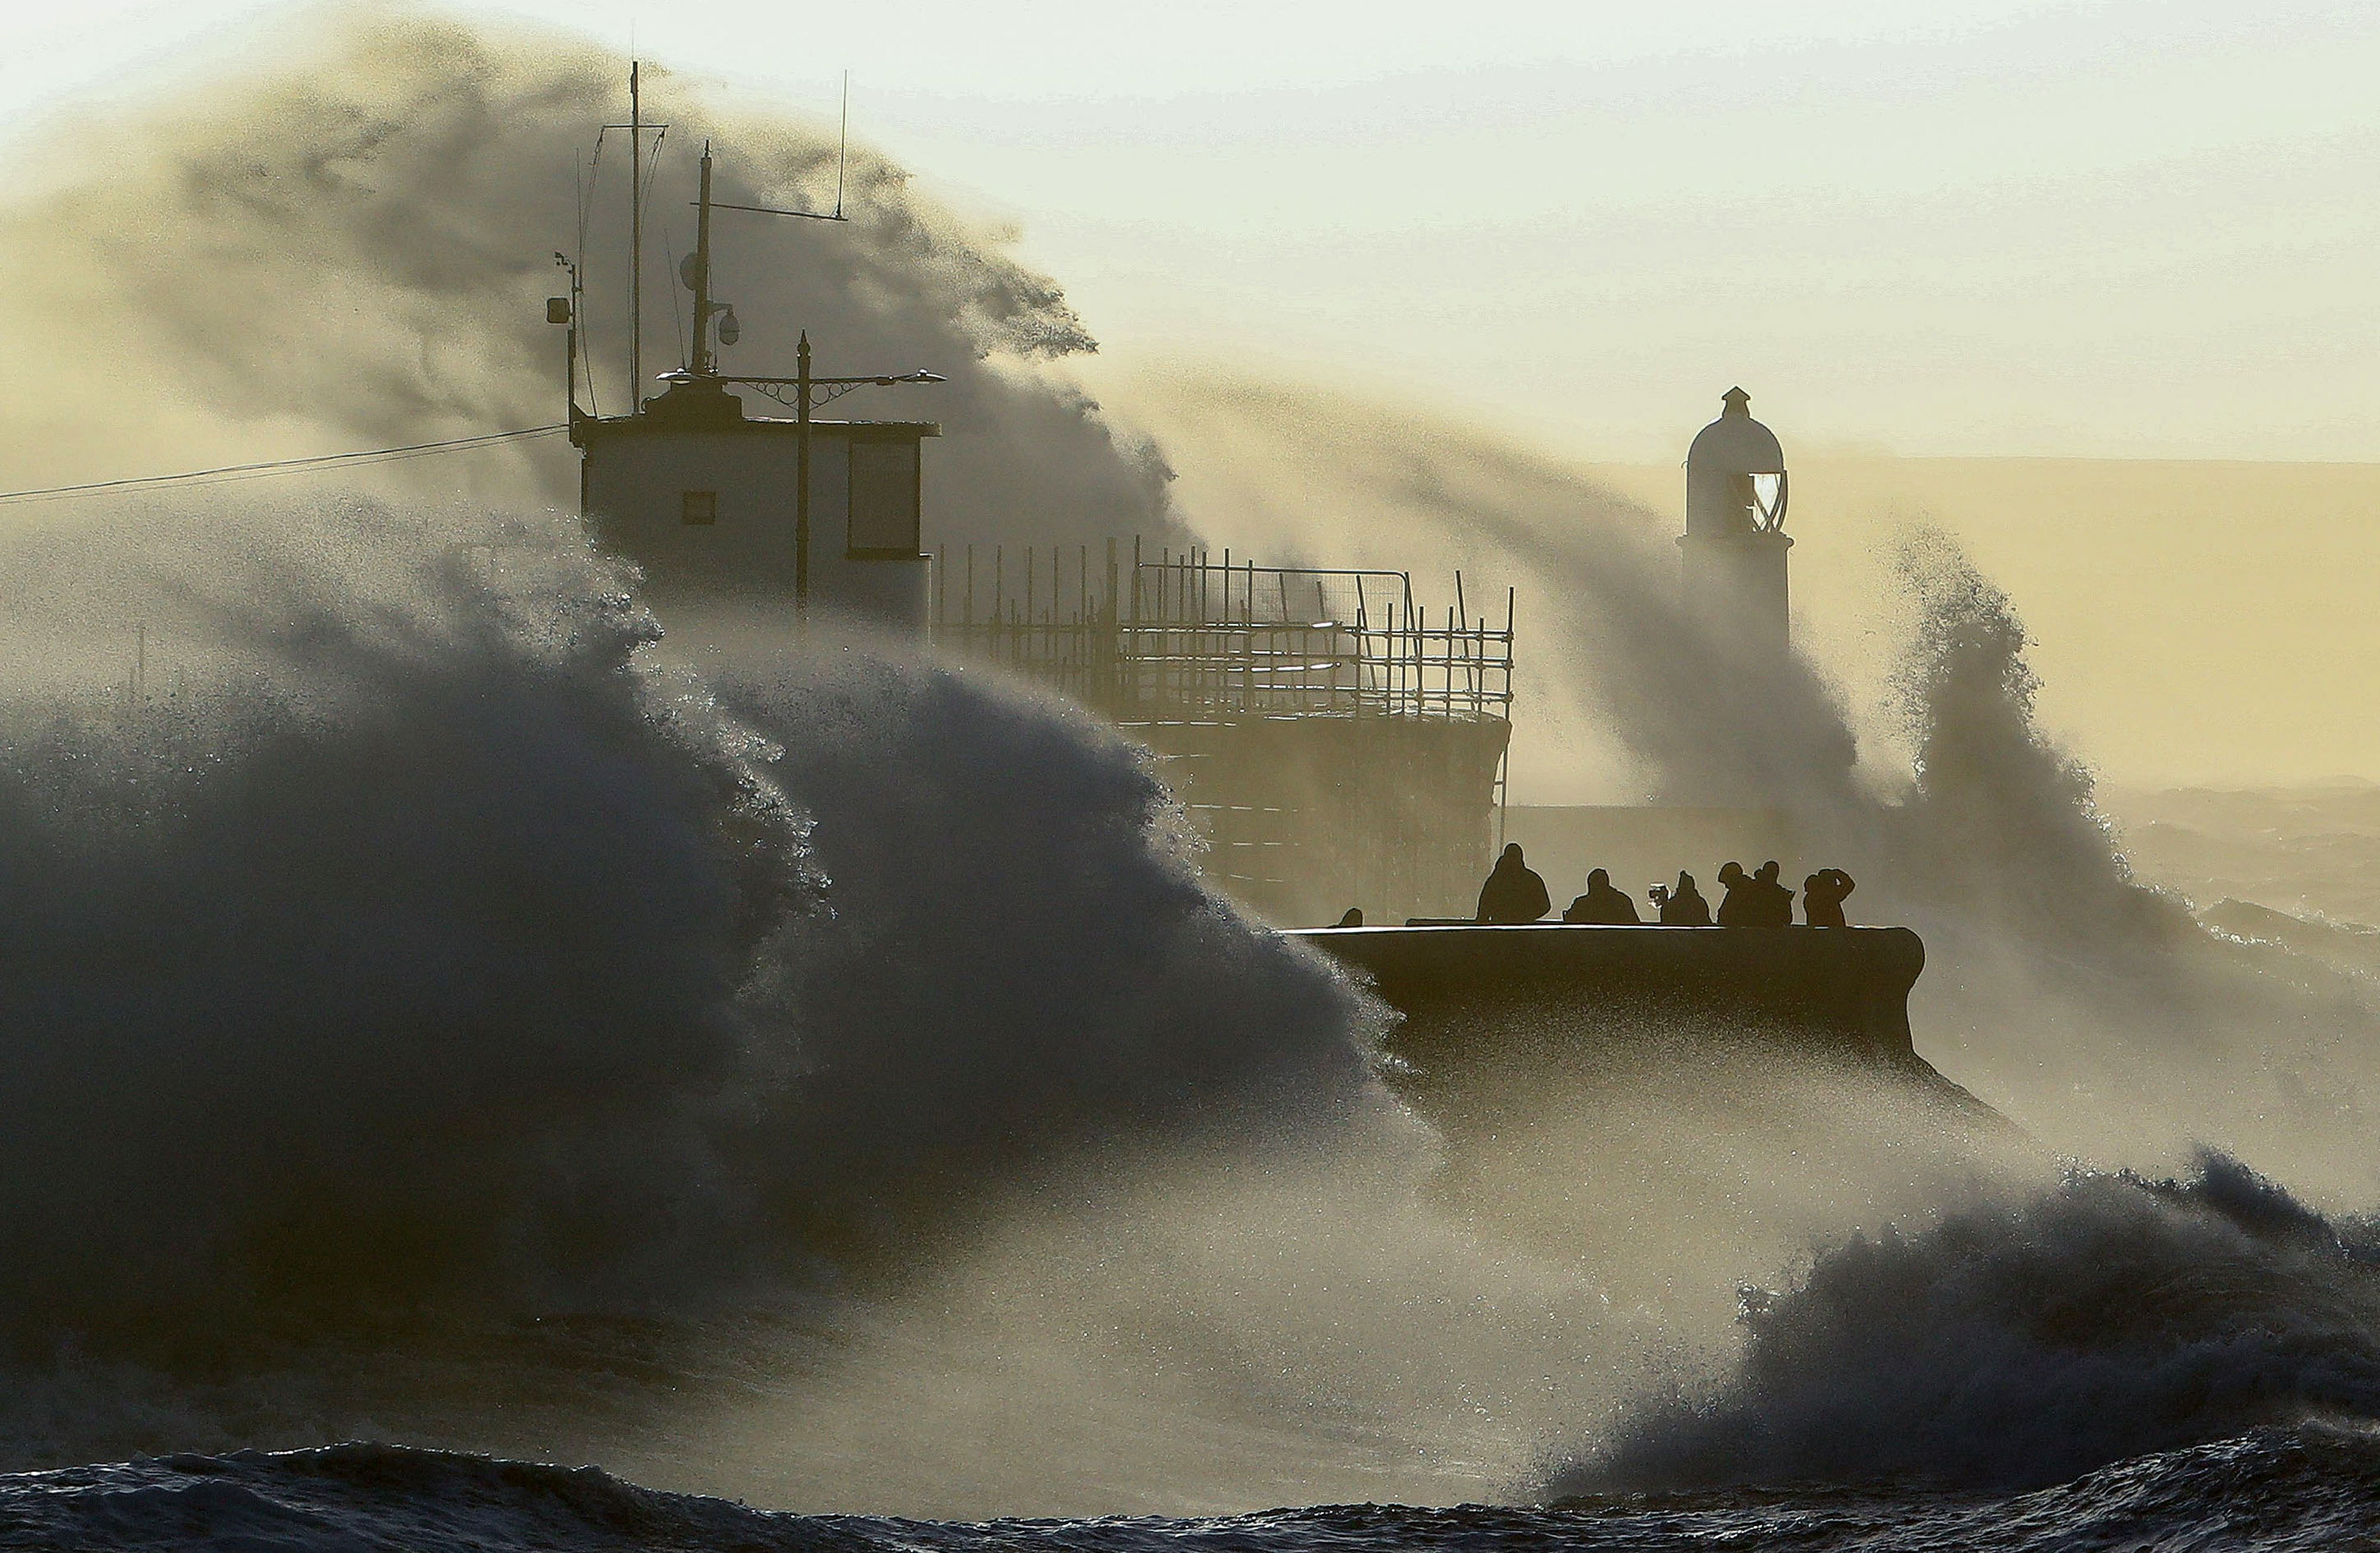 UK could be hit by more powerful storms like Eunice, as study